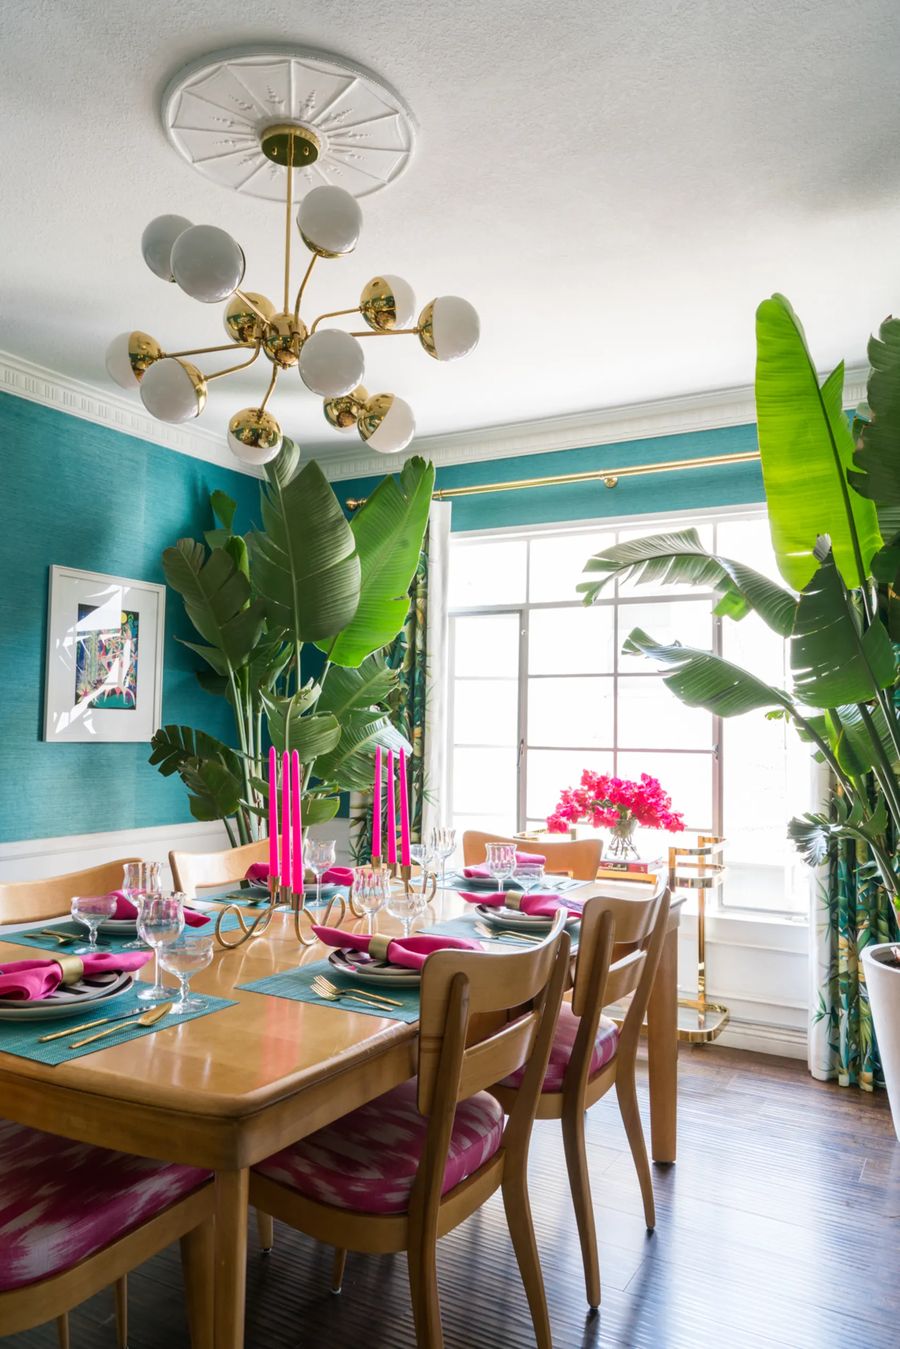 10 Best Tropical Dining Room Decor Ideas, Tropical Dining Room Chairs